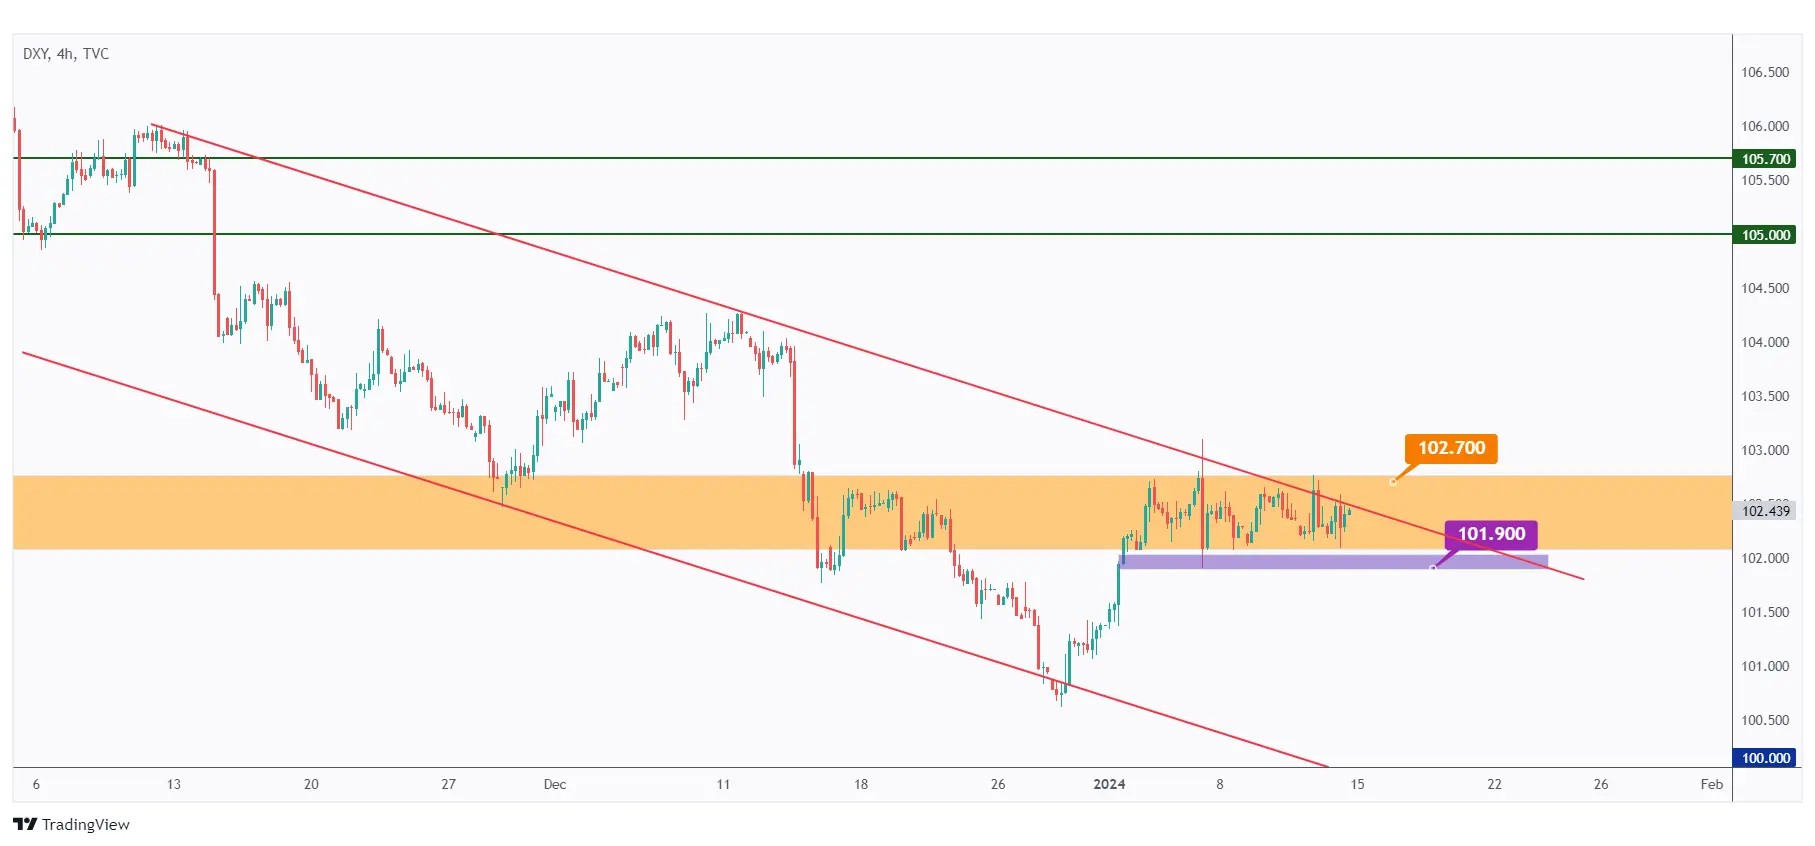 dxy 4h chart showing bearish sentiment inside the falling channel.